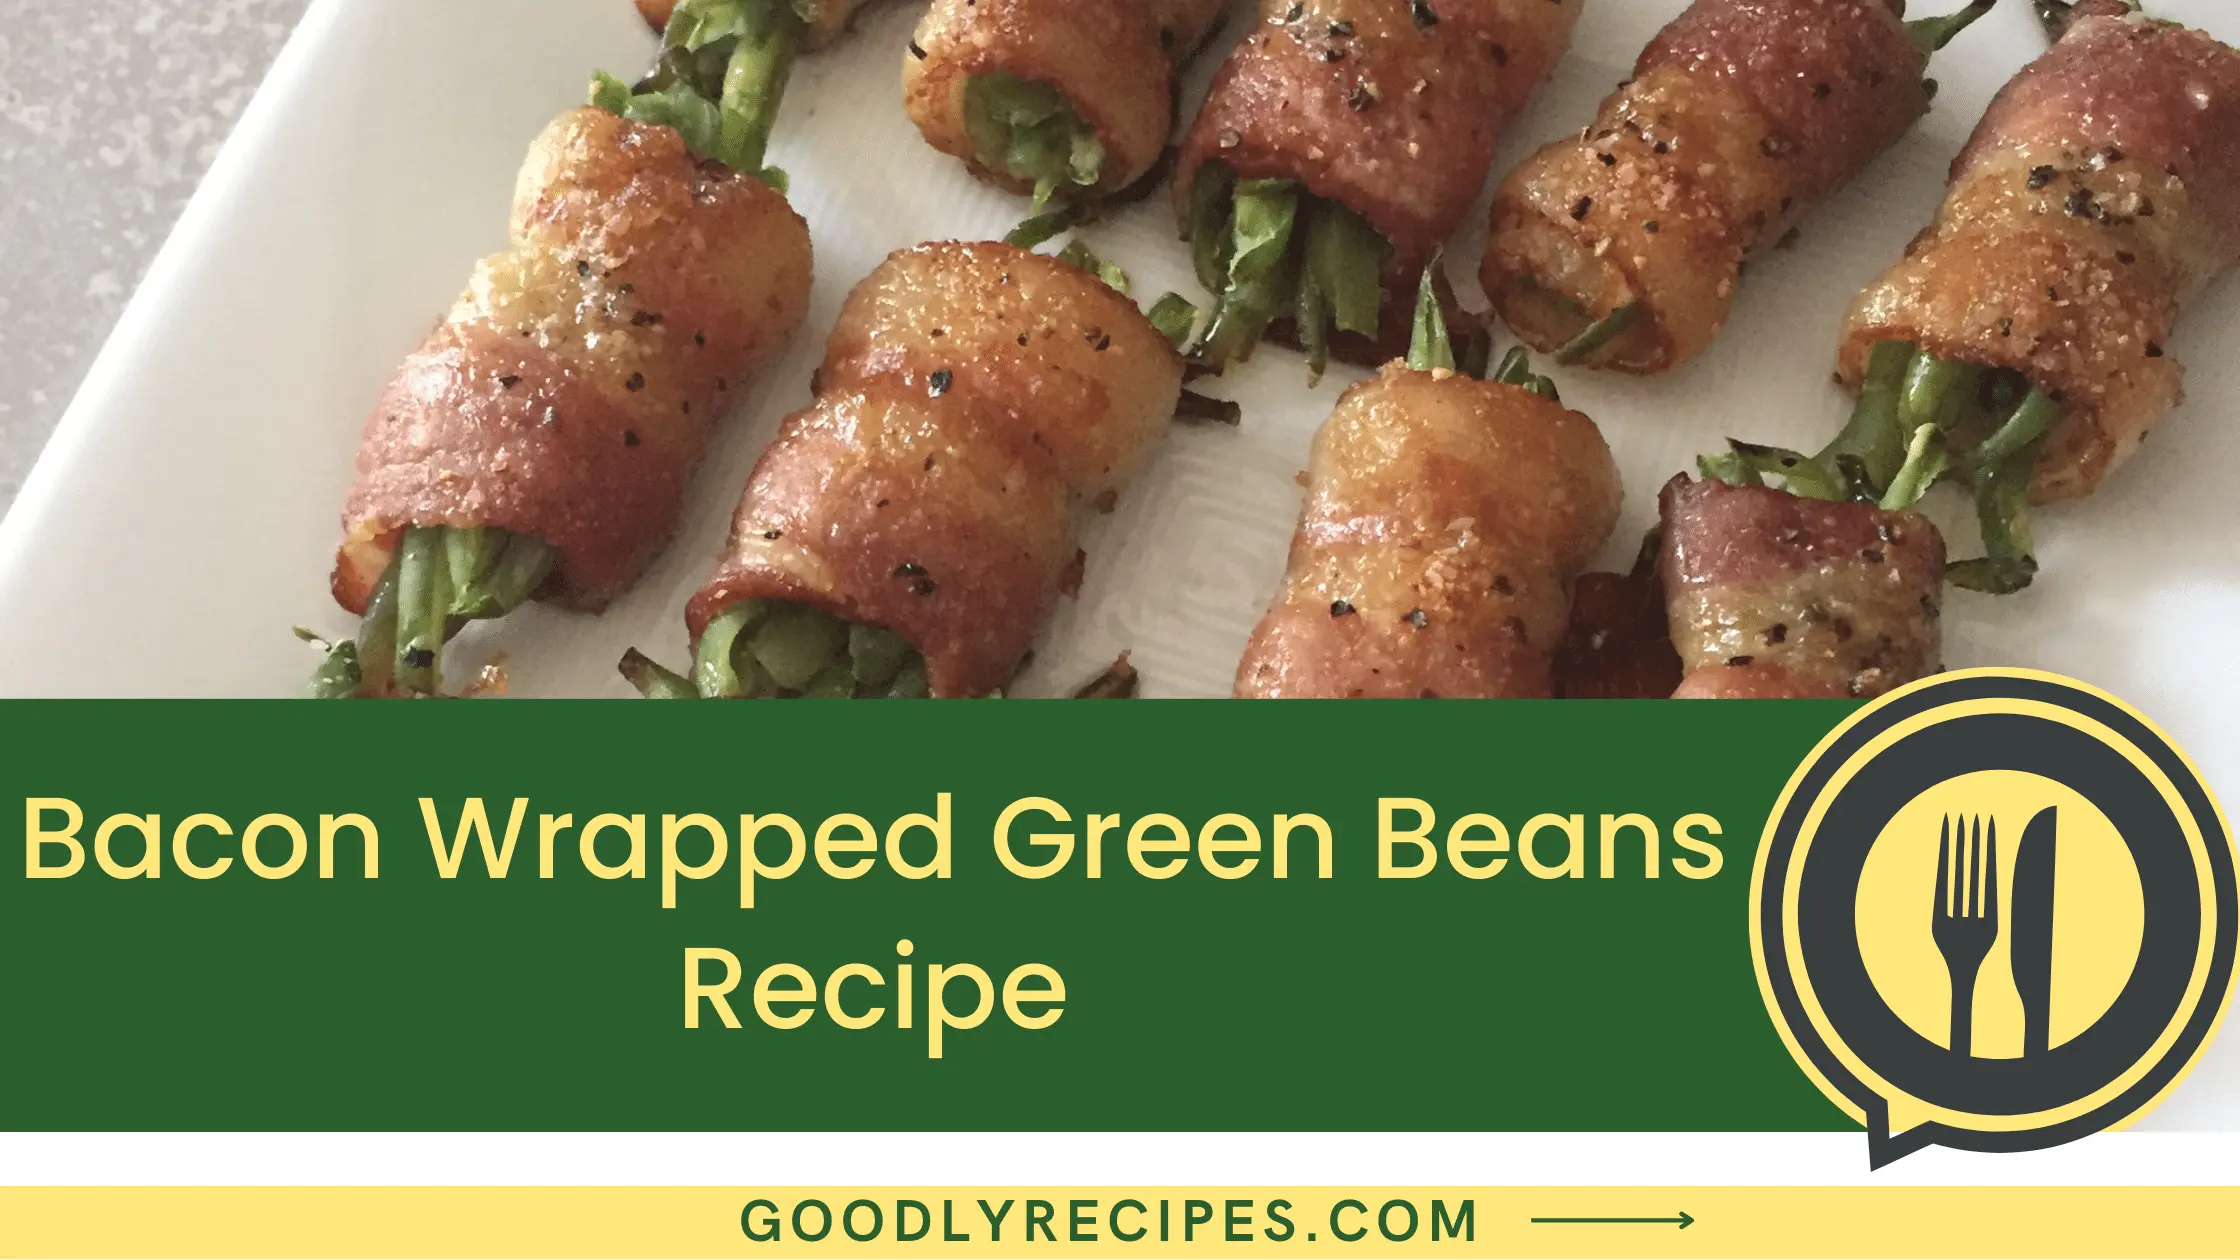 What are Bacon-Wrapped Green Beans?